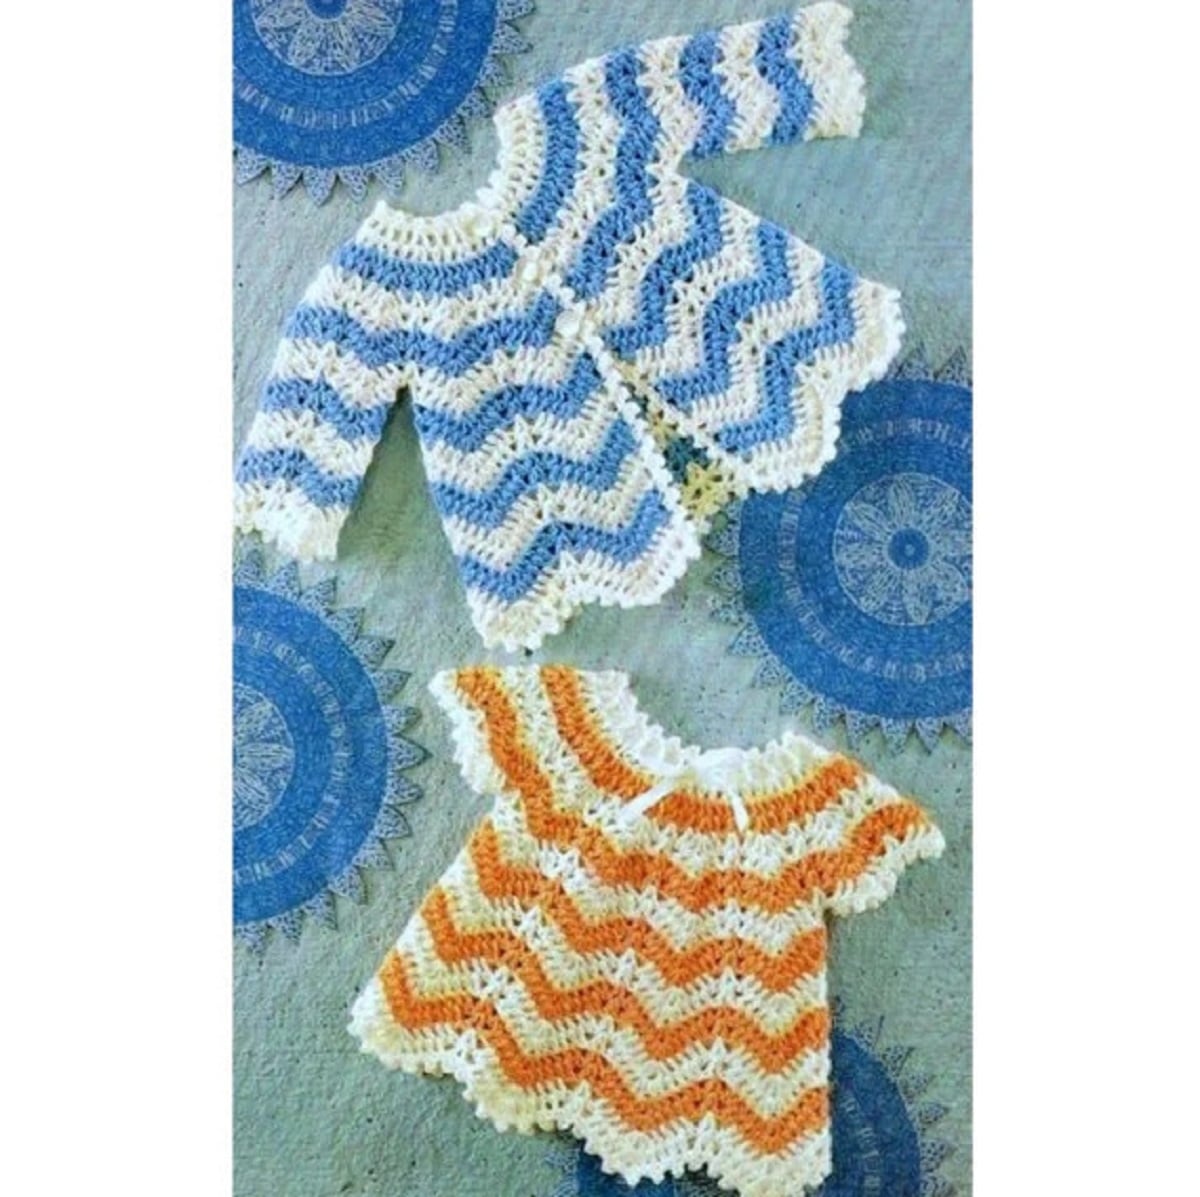 A blue and white zig zag crochet baby cardigan next to an orange and white crochet dress with the same pattern.